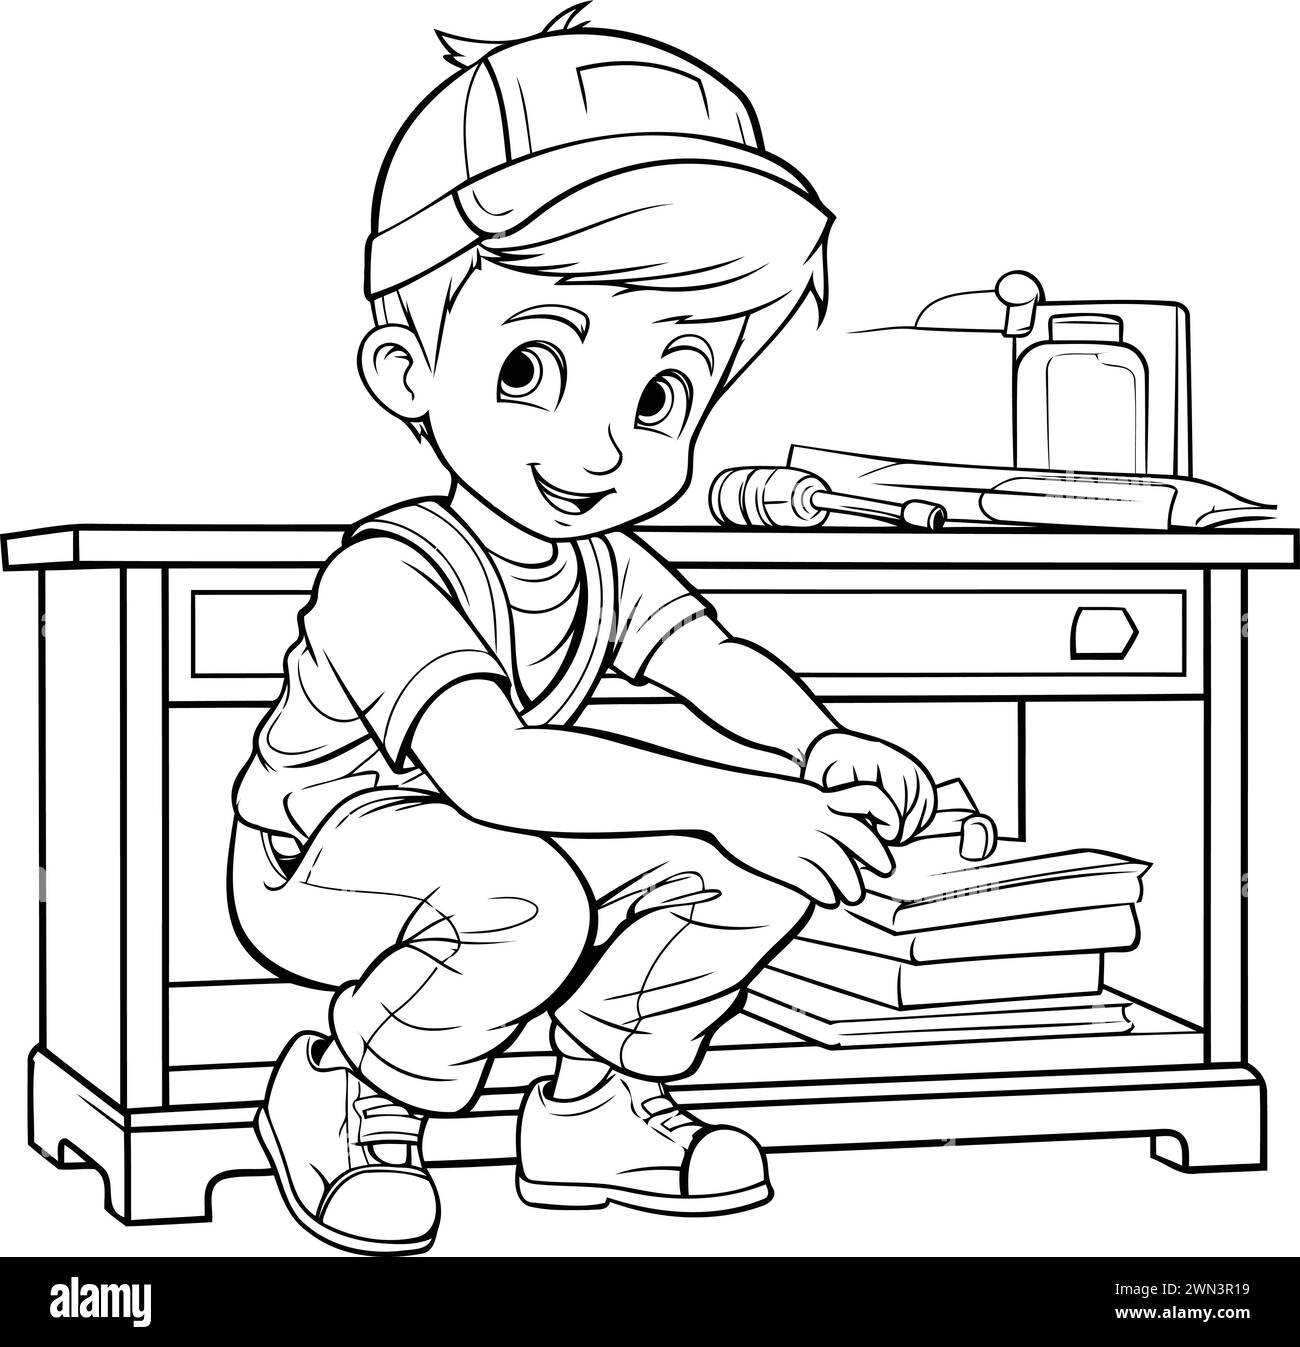 Coloring Page Outline Of a Cute Little Boy Carrying Books Stock Vector ...